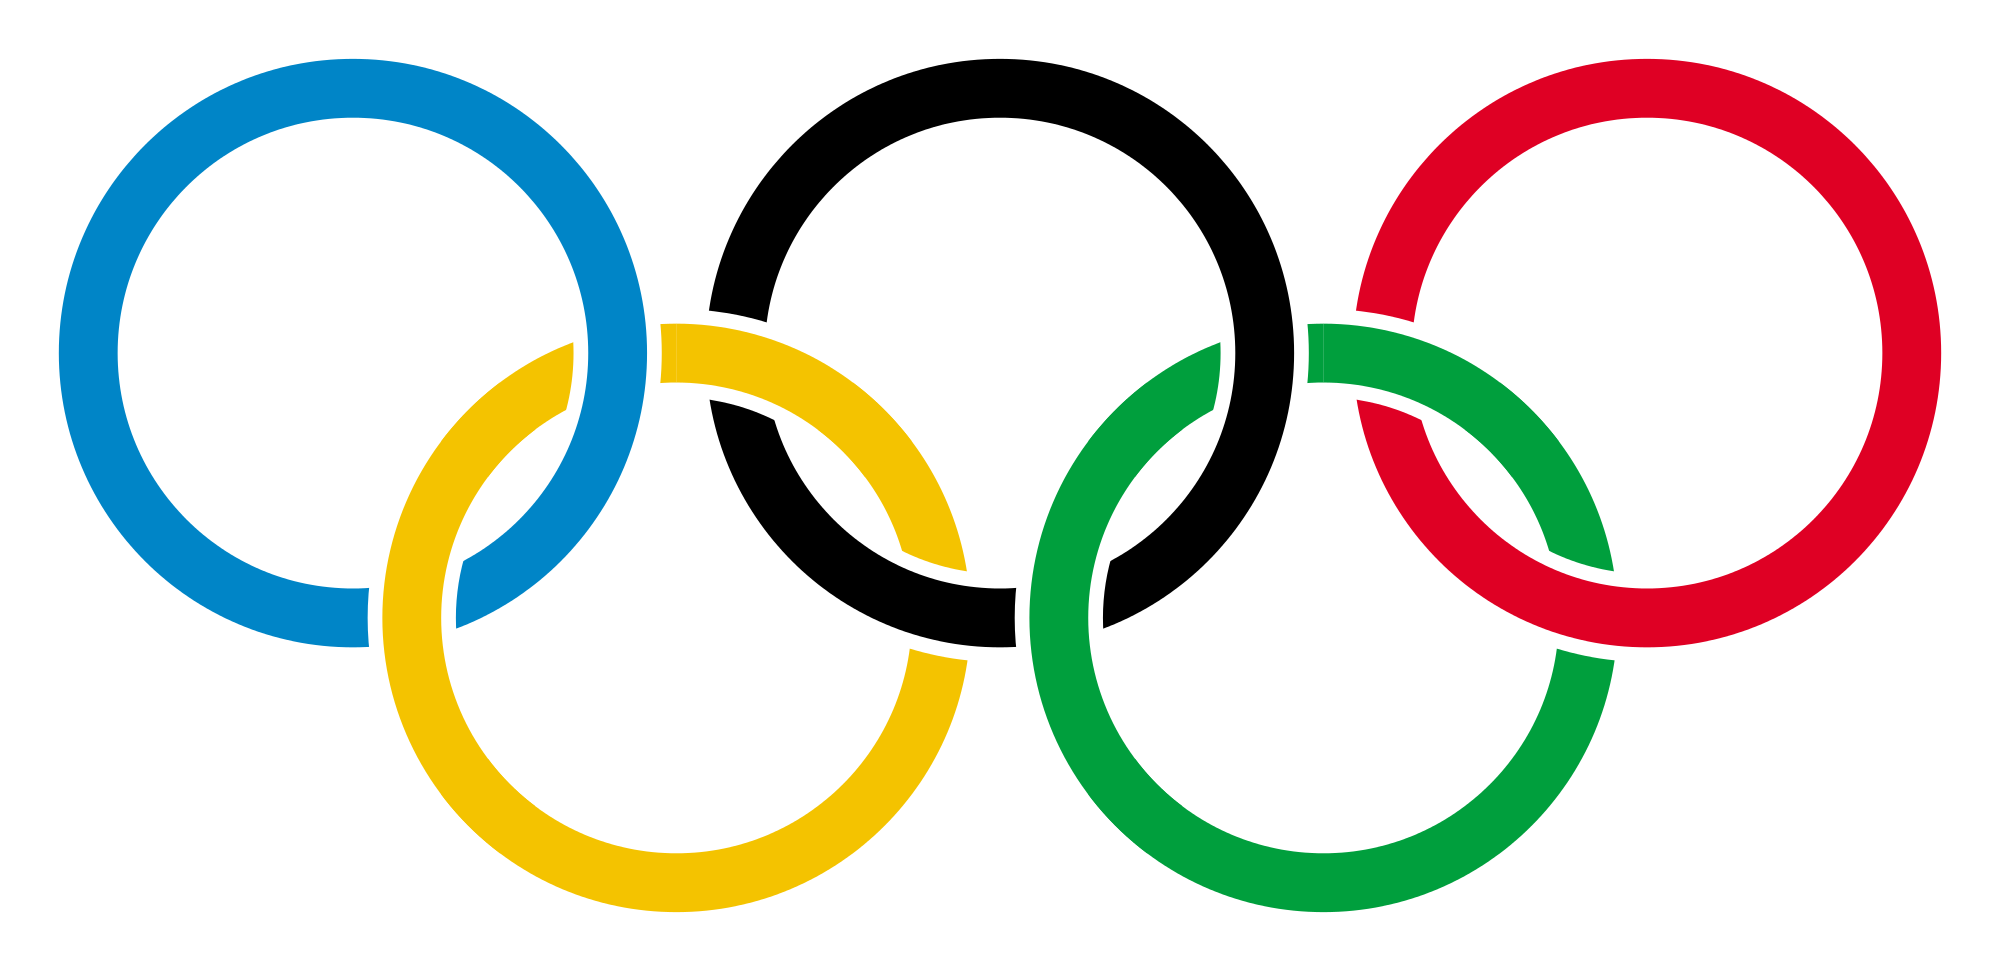 2000px-Olympic_rings_with_white_rims.svg.png